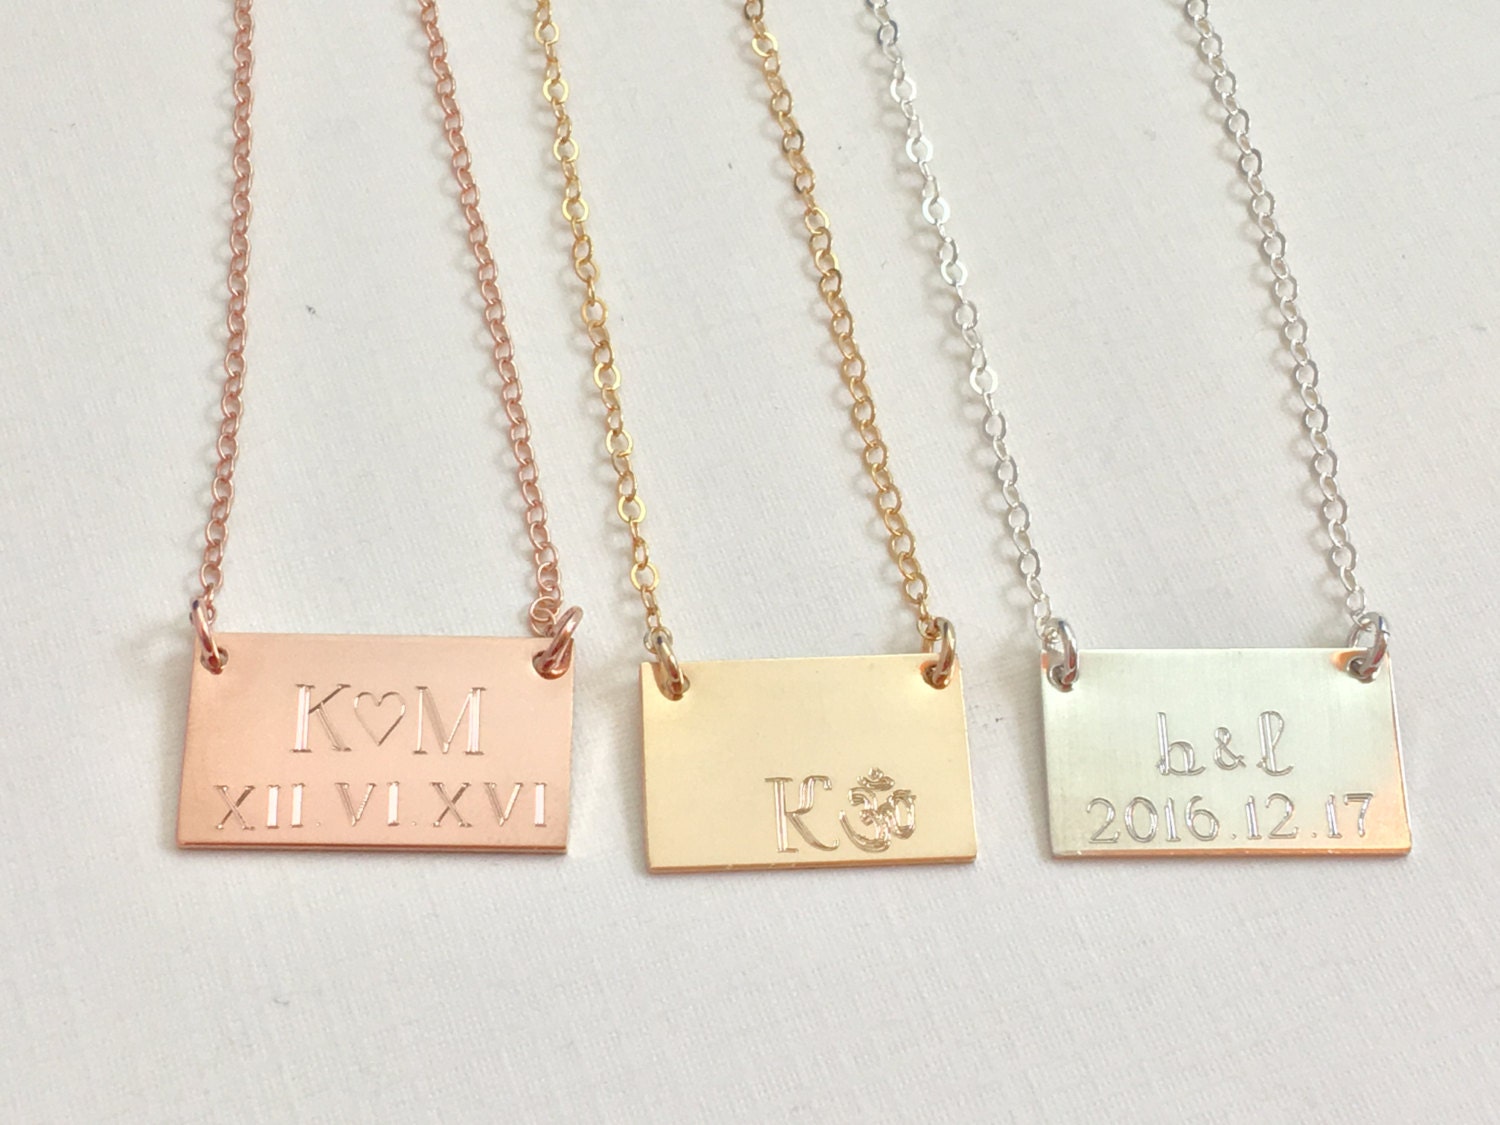 Wedding date necklace, initial necklace, Personalized Necklace, engraved gold Necklace, bridesmaid gifts, gift for mom, new mom, new baby